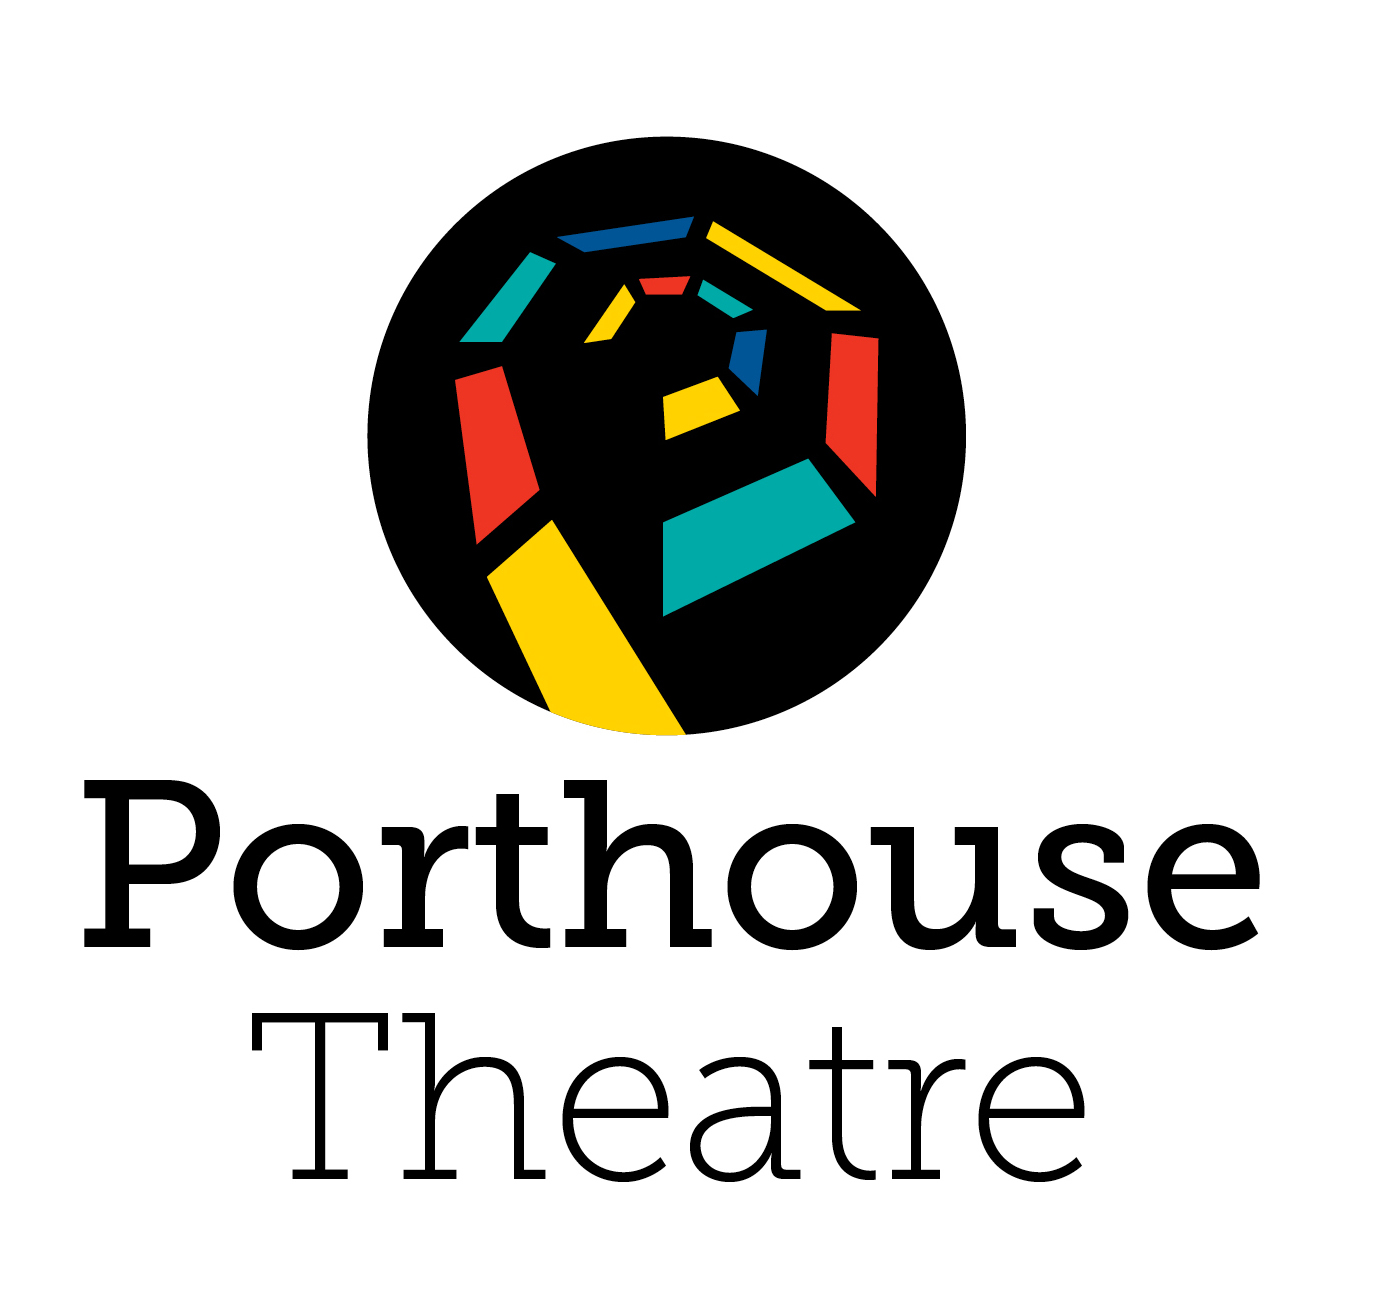 Porthouse Theatre - Theater | Backstage